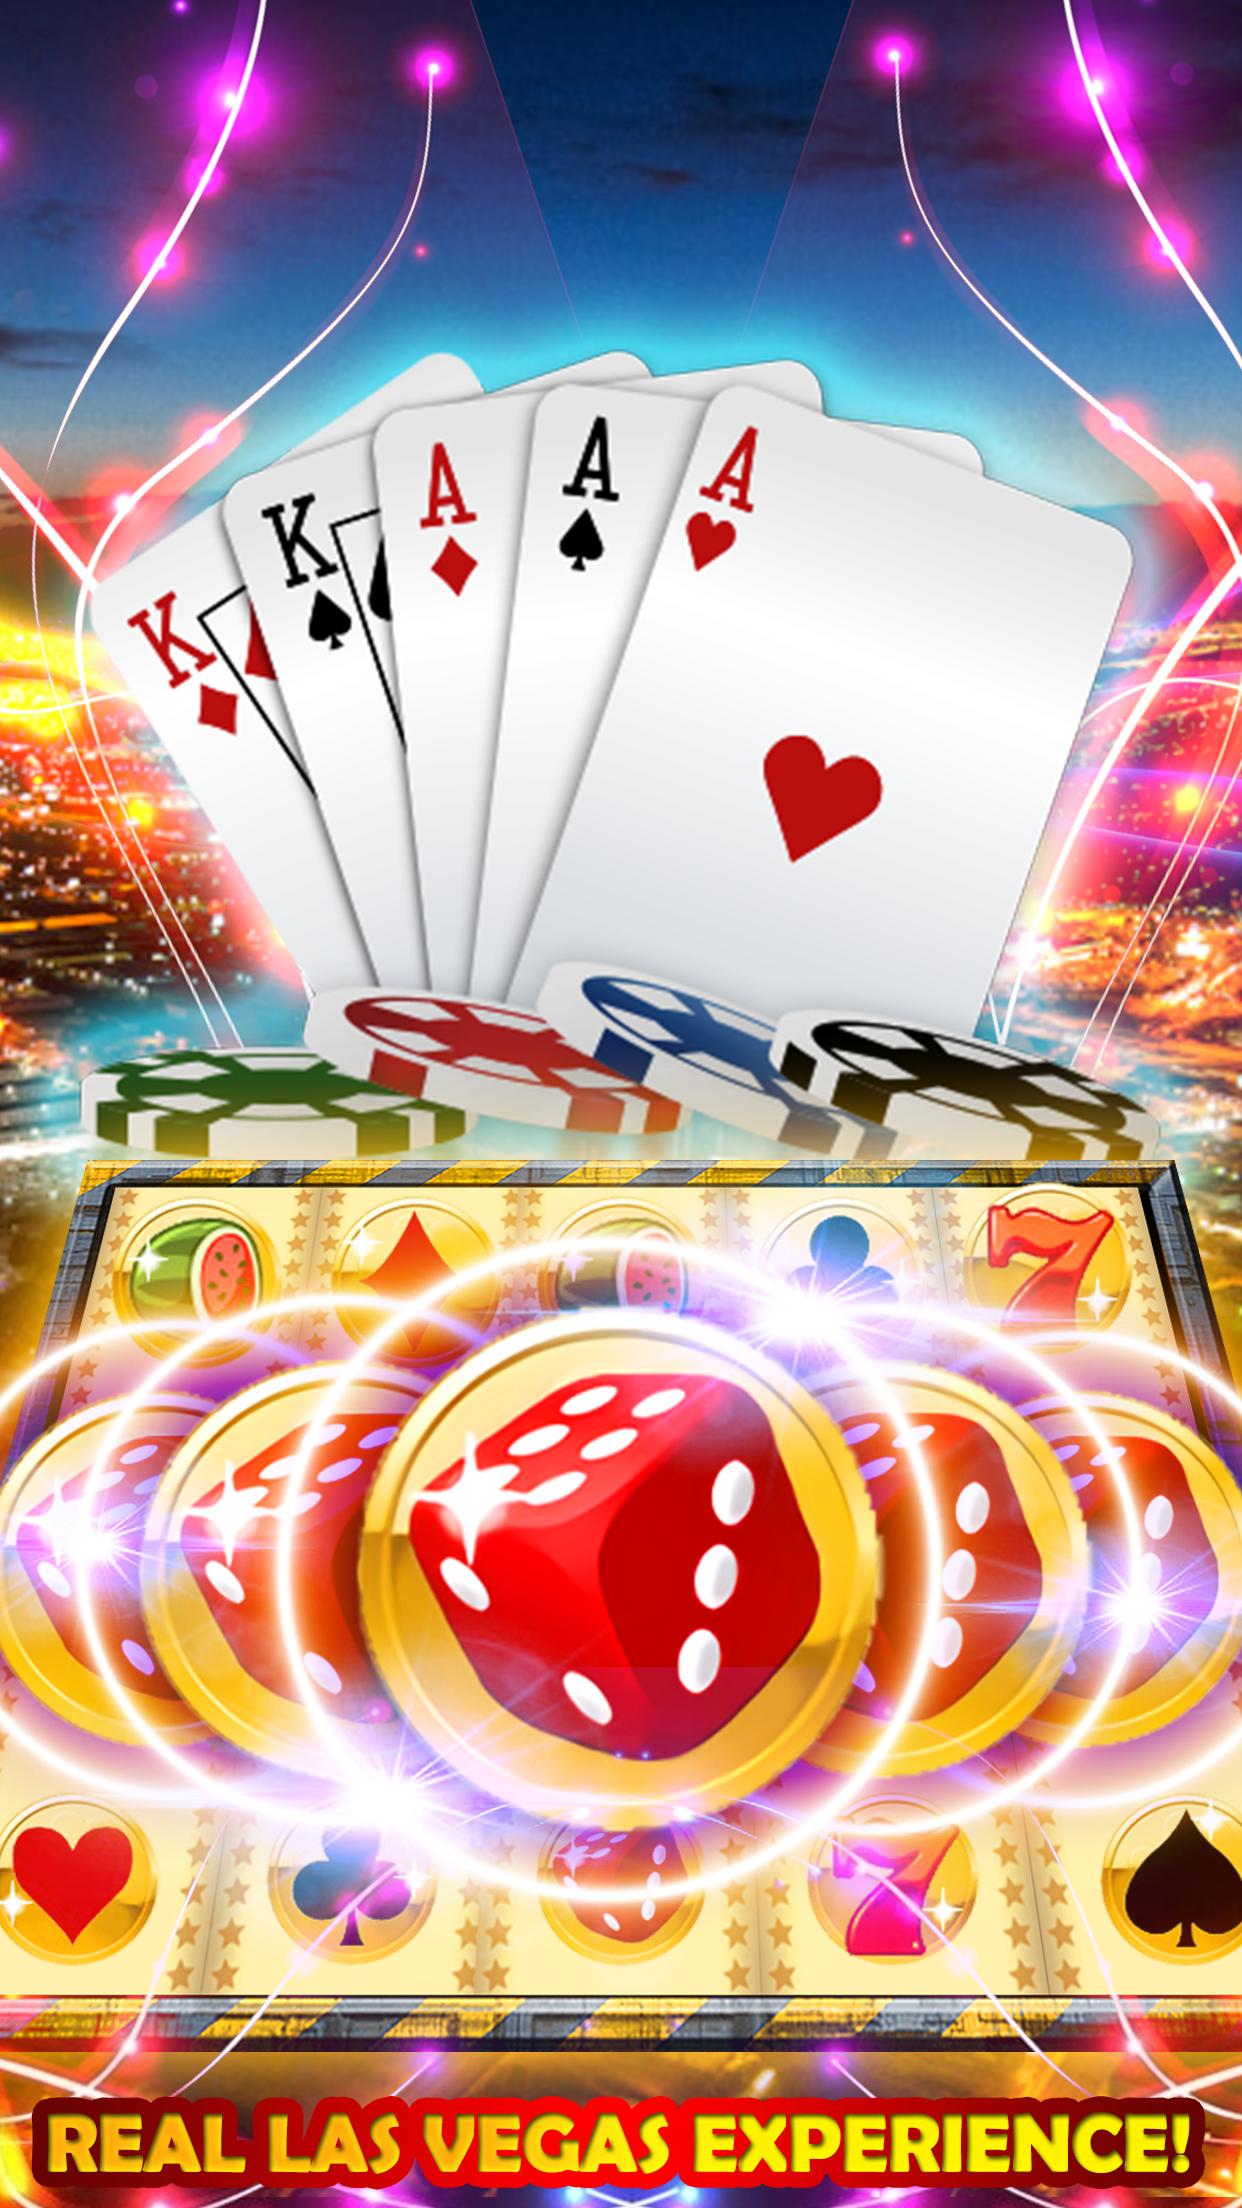 Casino VIP Deluxe - Free Slot for Android - APK Download